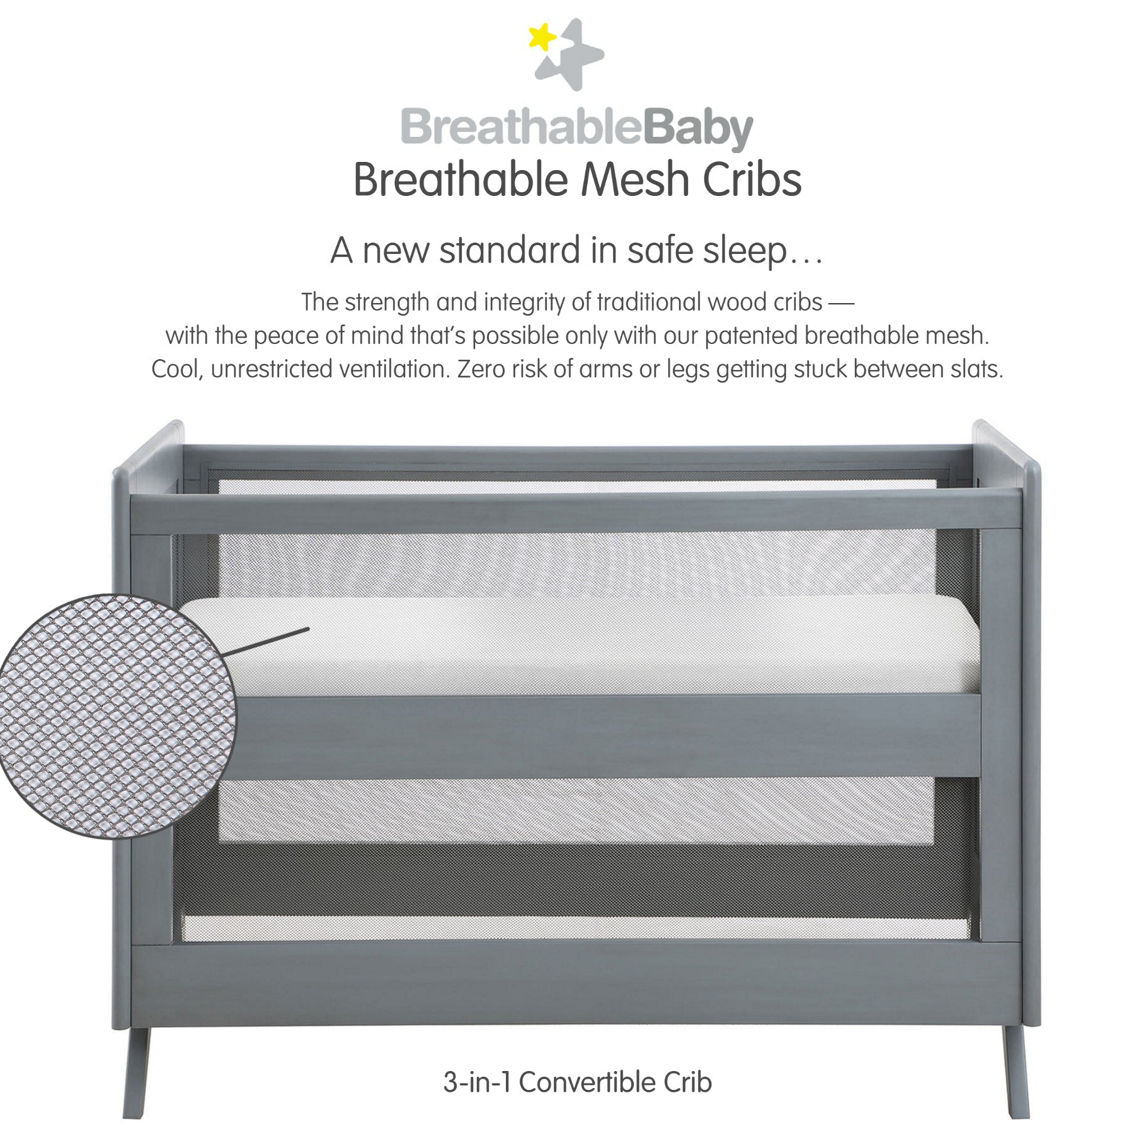 BreathableBaby Breathable Mesh 3-in-1 Convertible Crib - Image 2 of 5